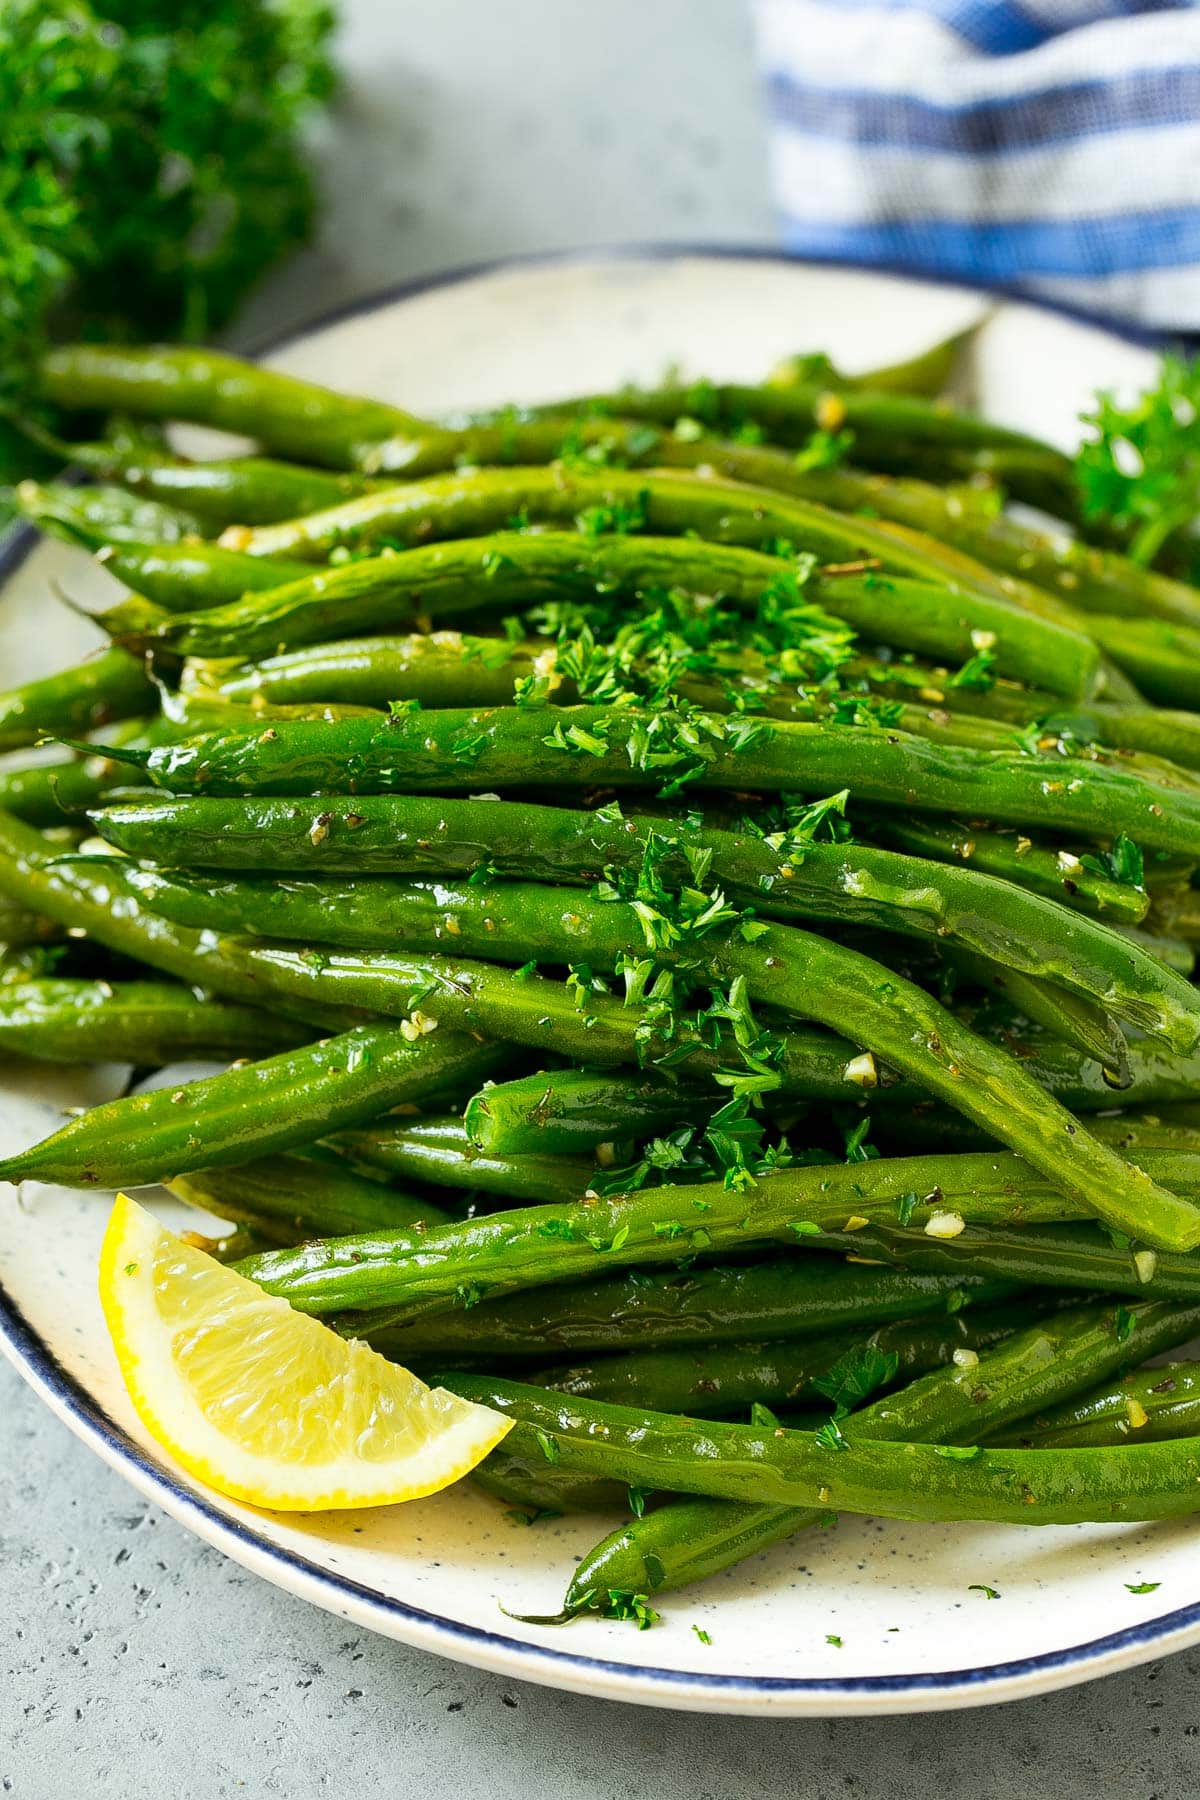 A serving plate of roasted green beans with parsley.